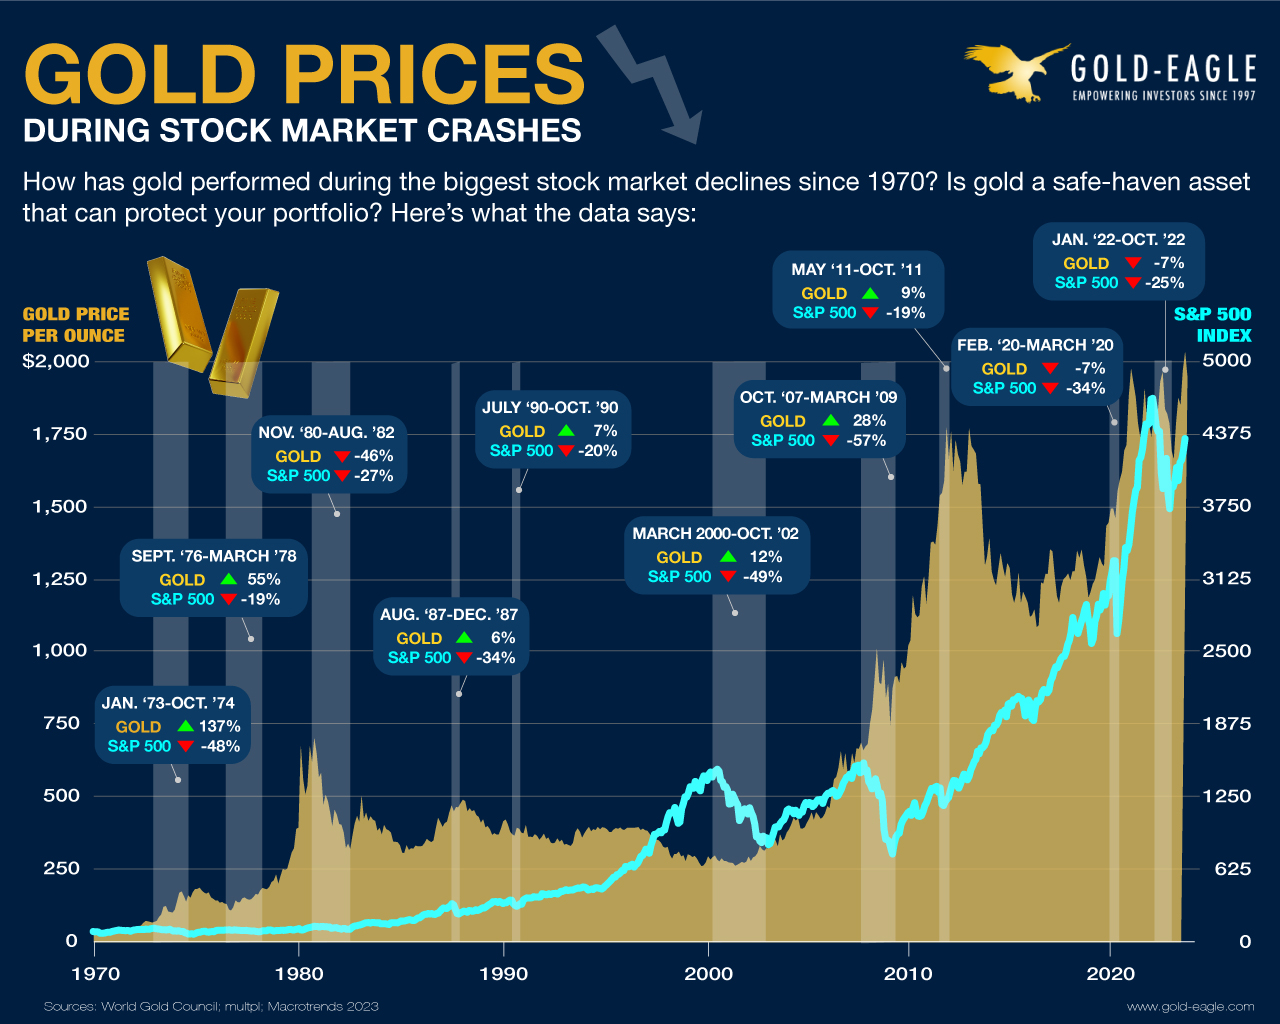 Infographic: Gold prices and stock market crashes